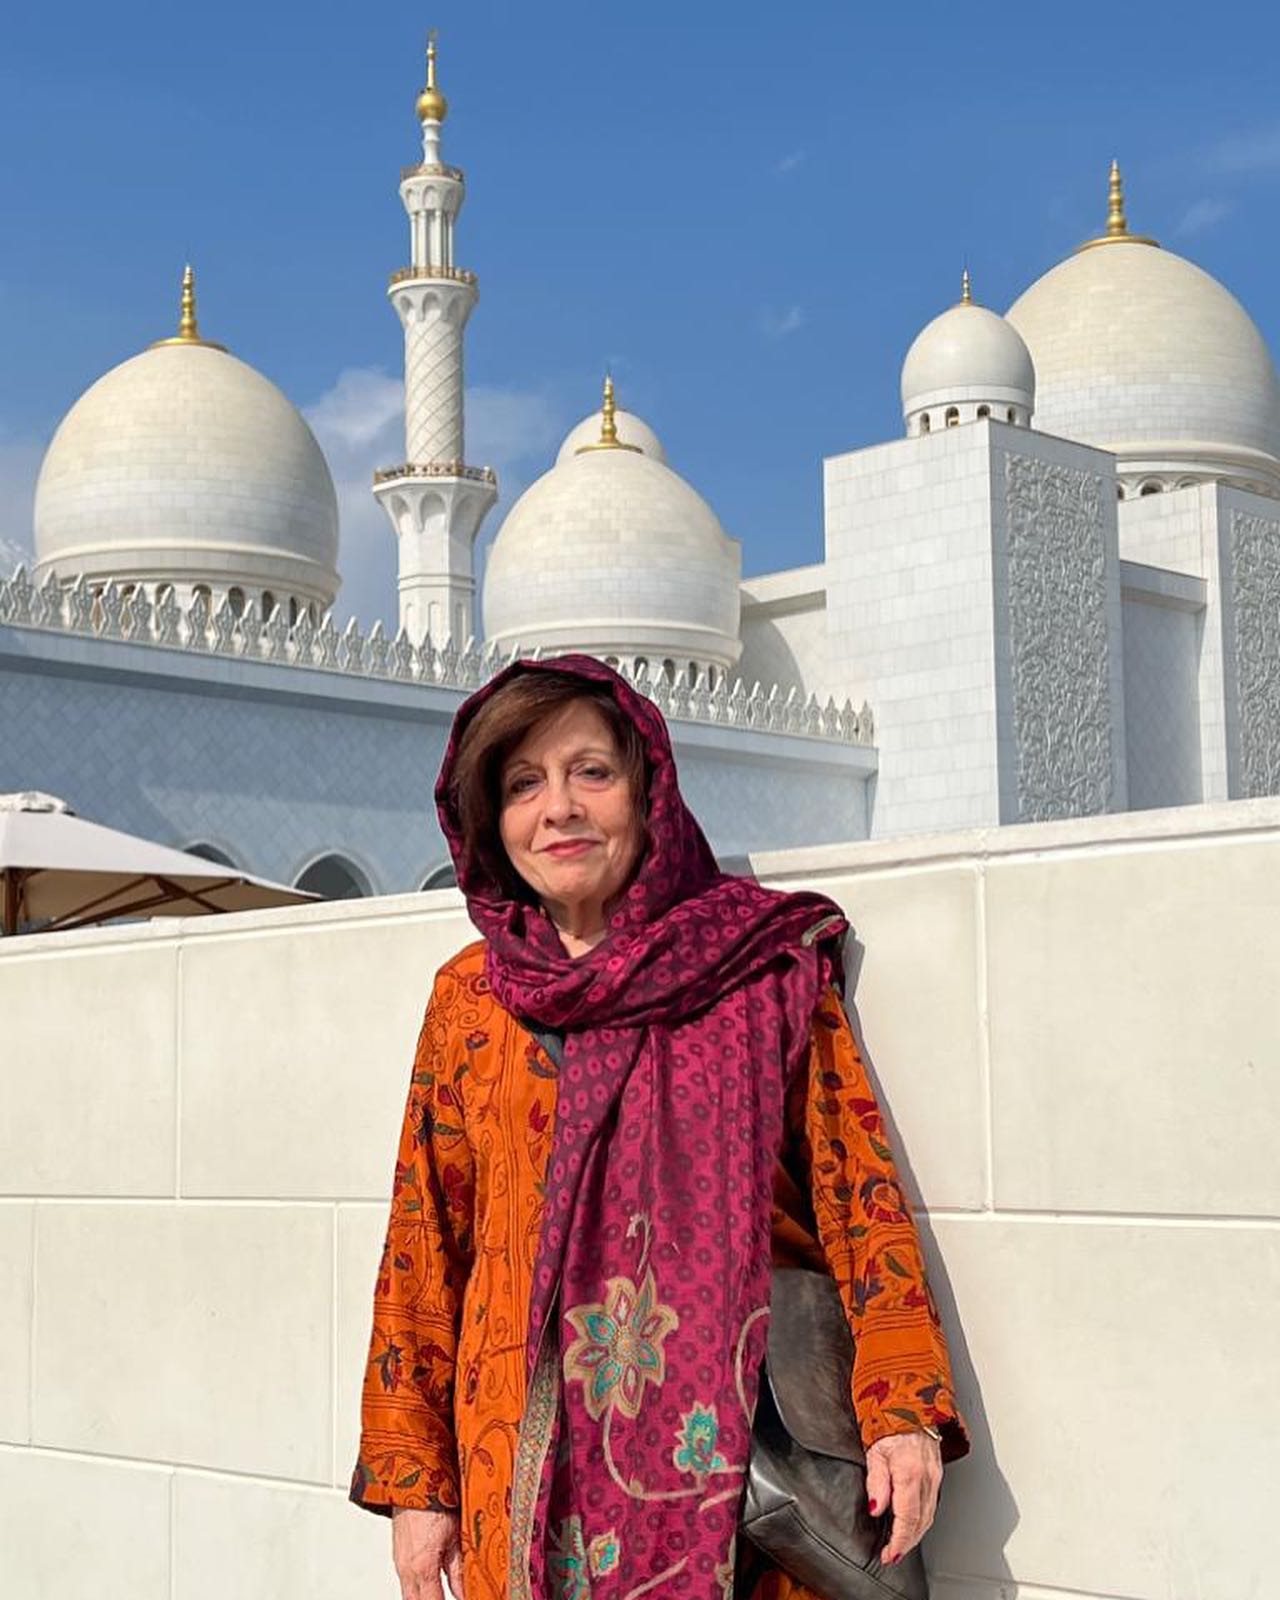 Abu Dhabi Diary – A Visit to Sheikh Zayed Grand Mosque Center